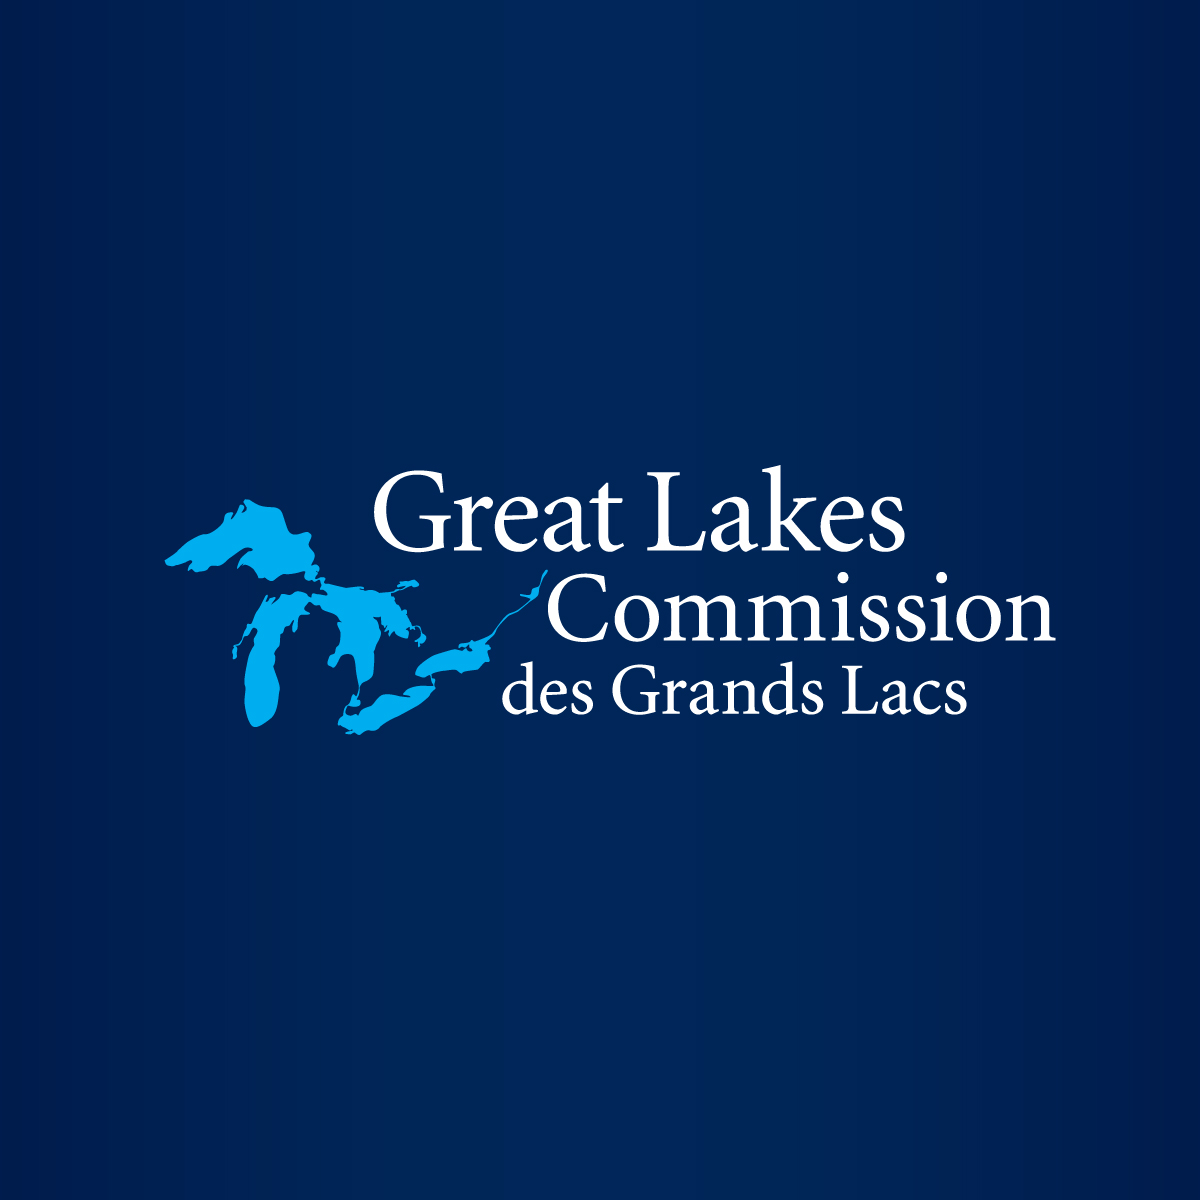 Grants awarded to support 5 U.P. conservation projects